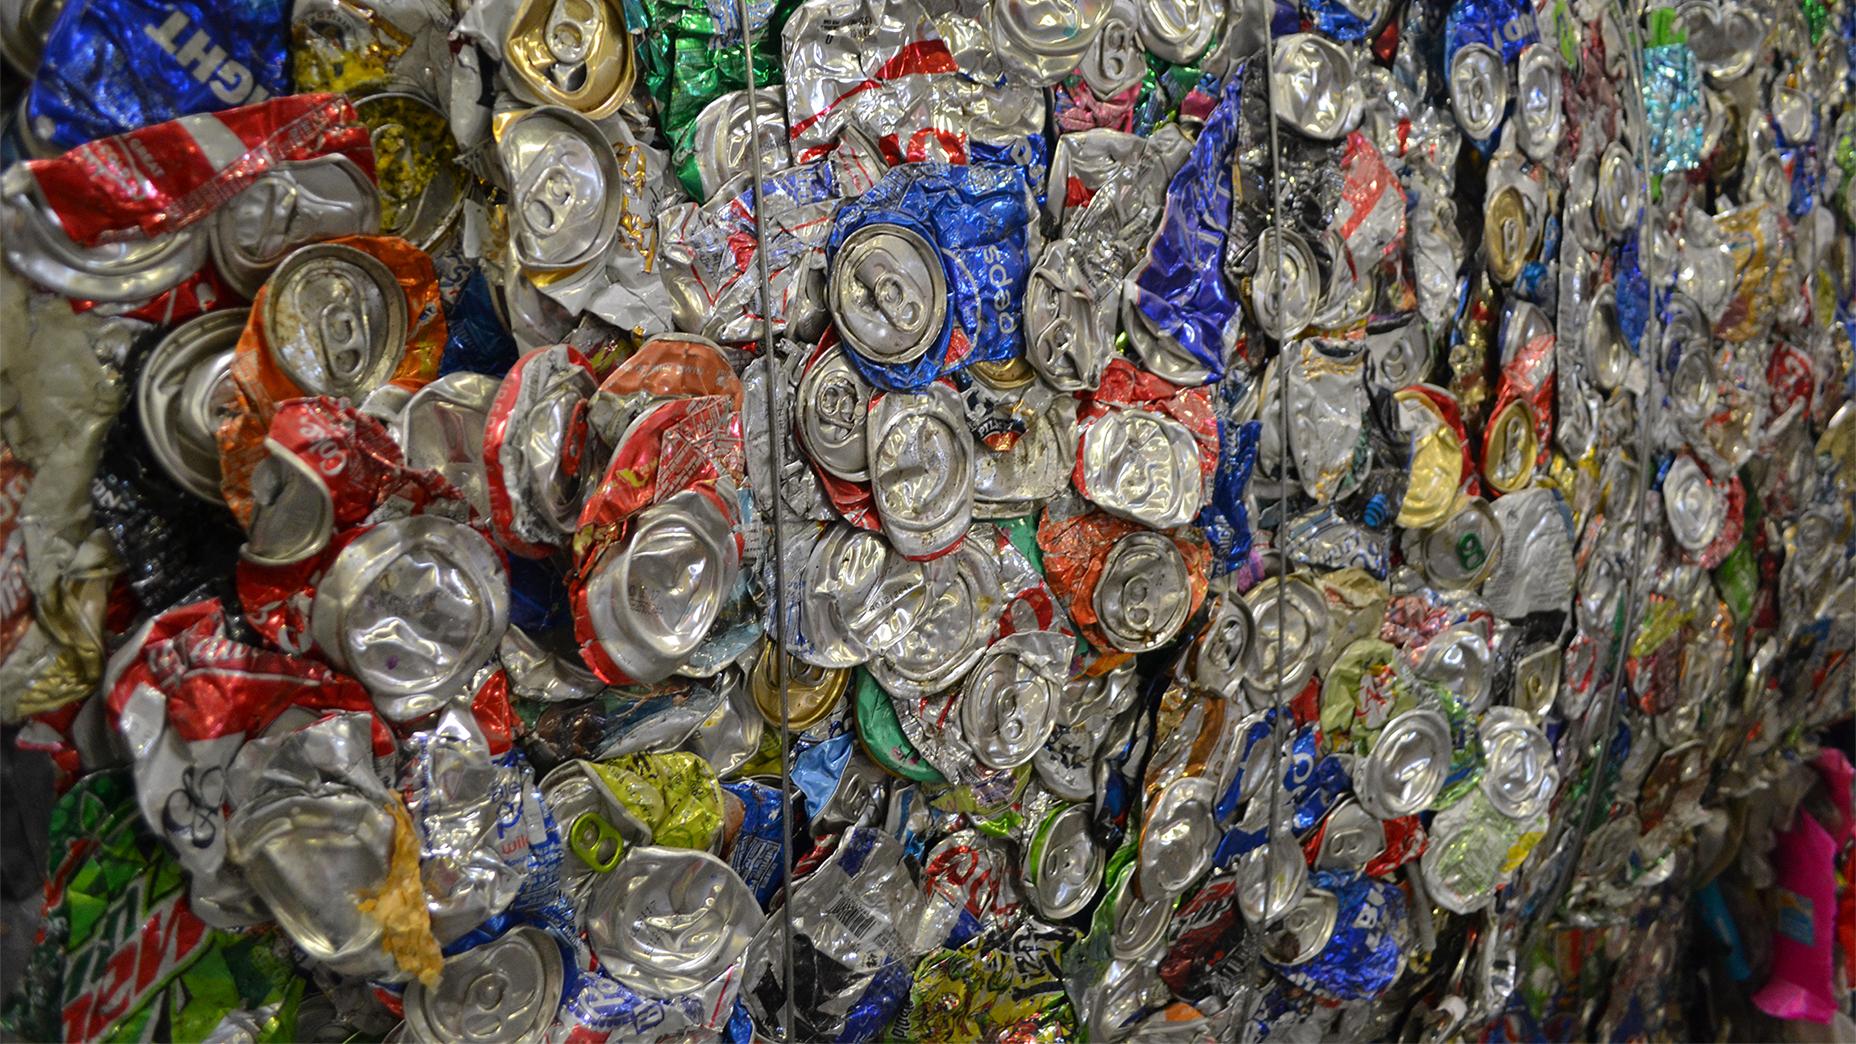 Aluminum cans bundled together in large bales at one of Chicago's recycling facilities wait to be transferred into a container and delivered elsewhere. (Alex Ruppenthal / Chicago Tonight)